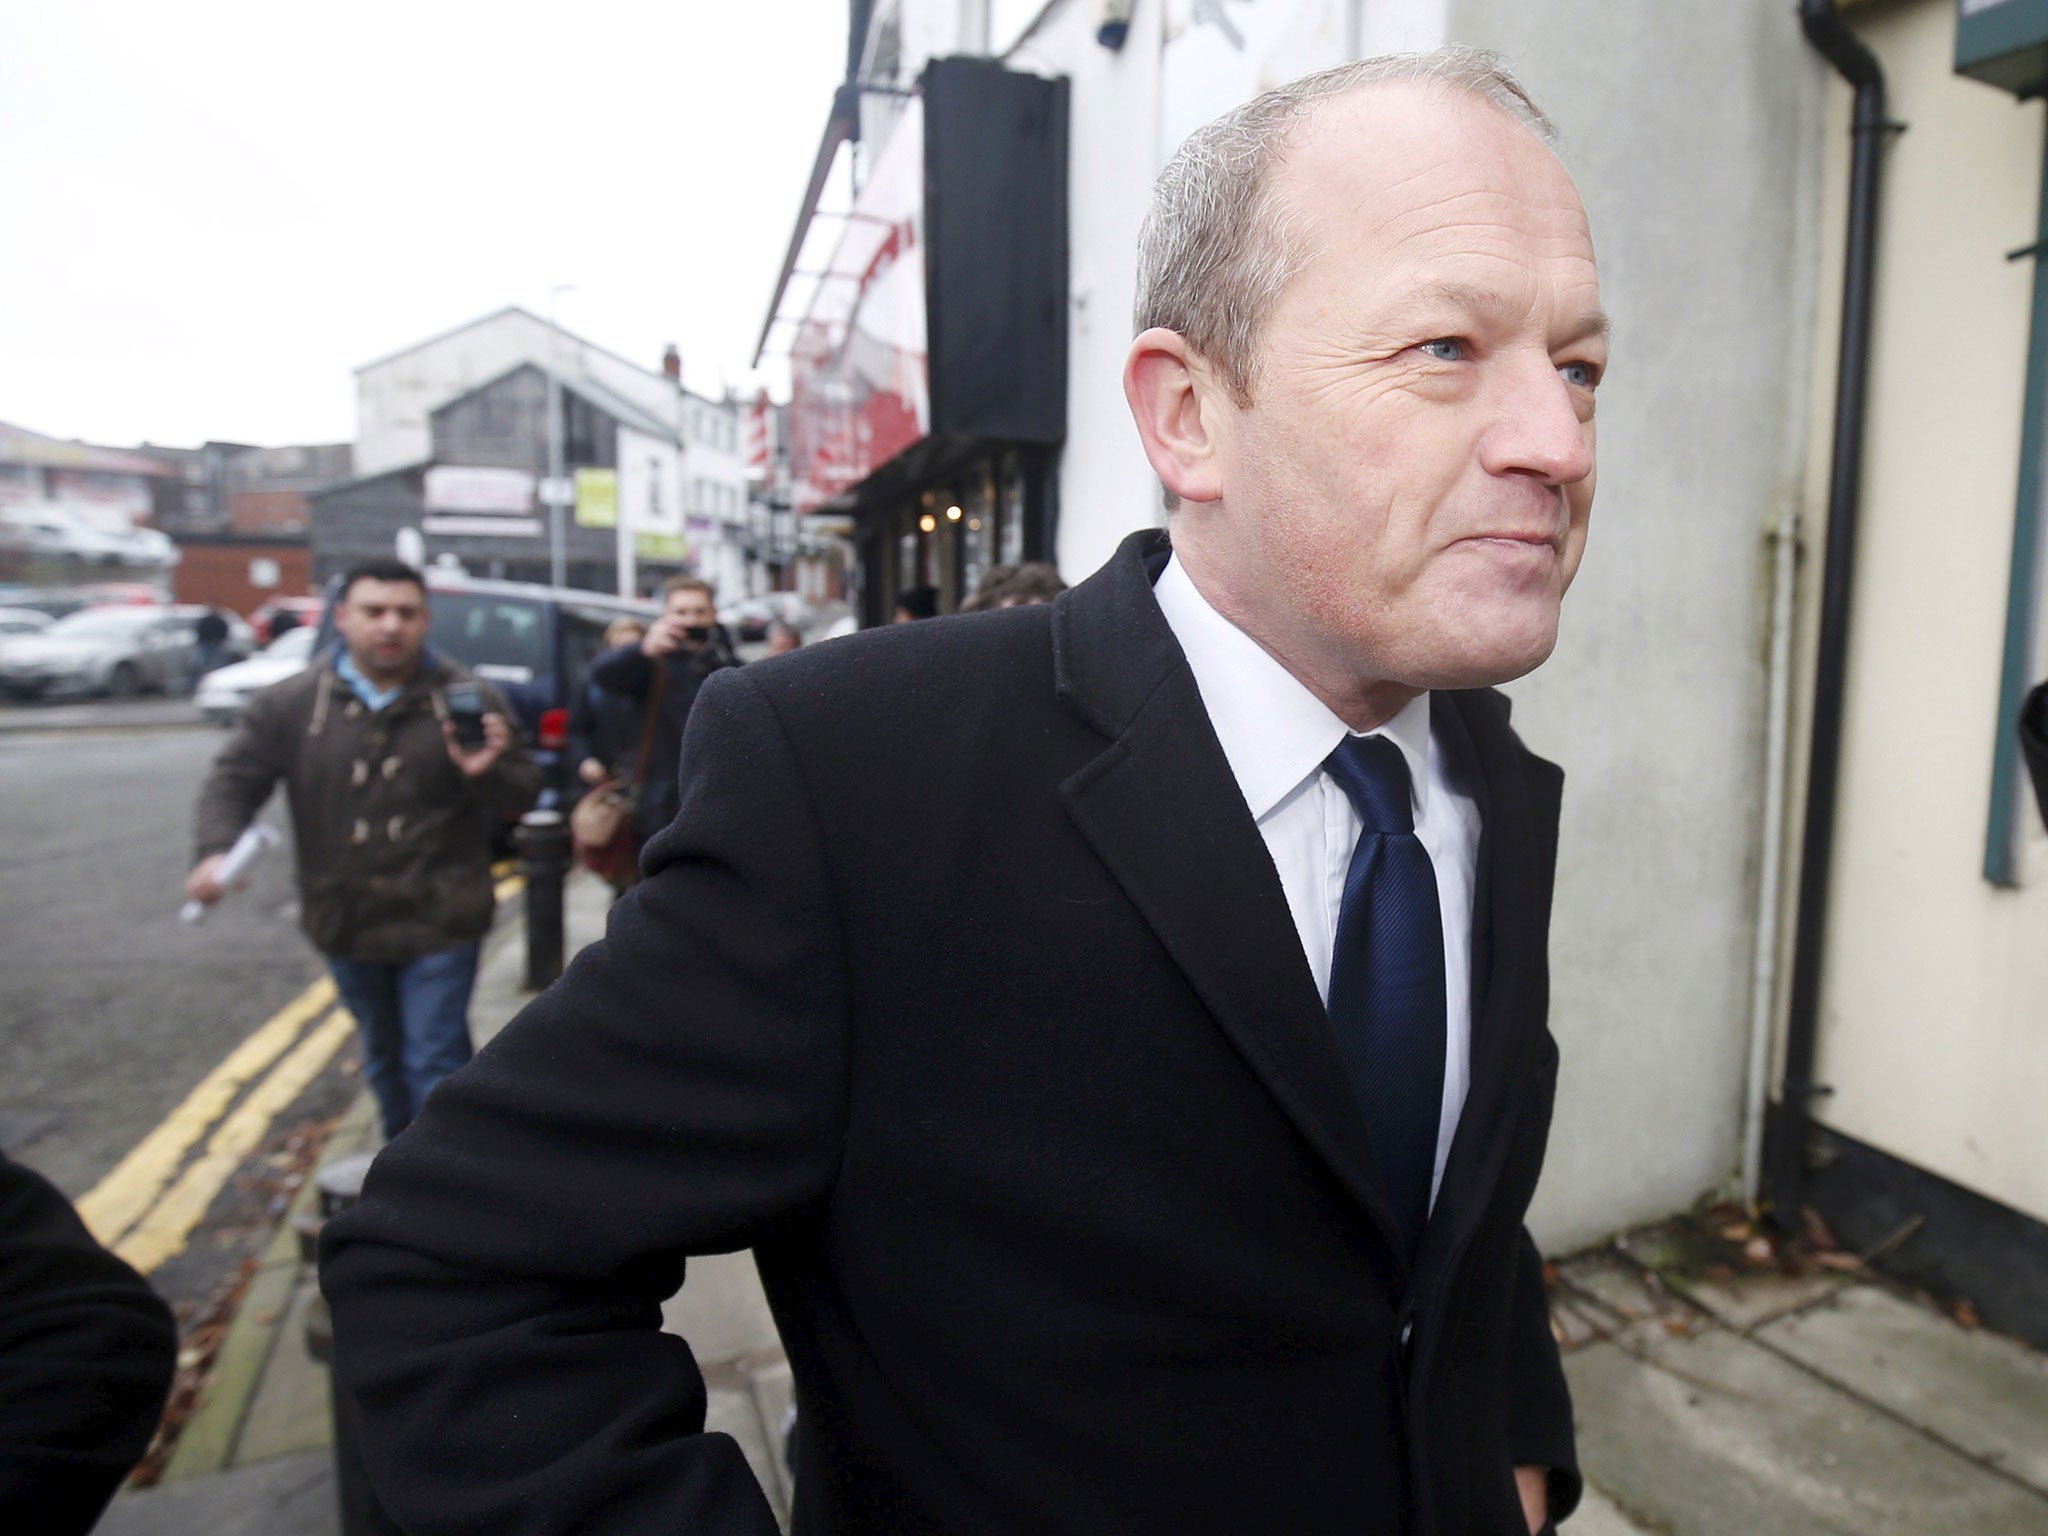 Danczuk was initially suspended by Labour after media allegations about his private life